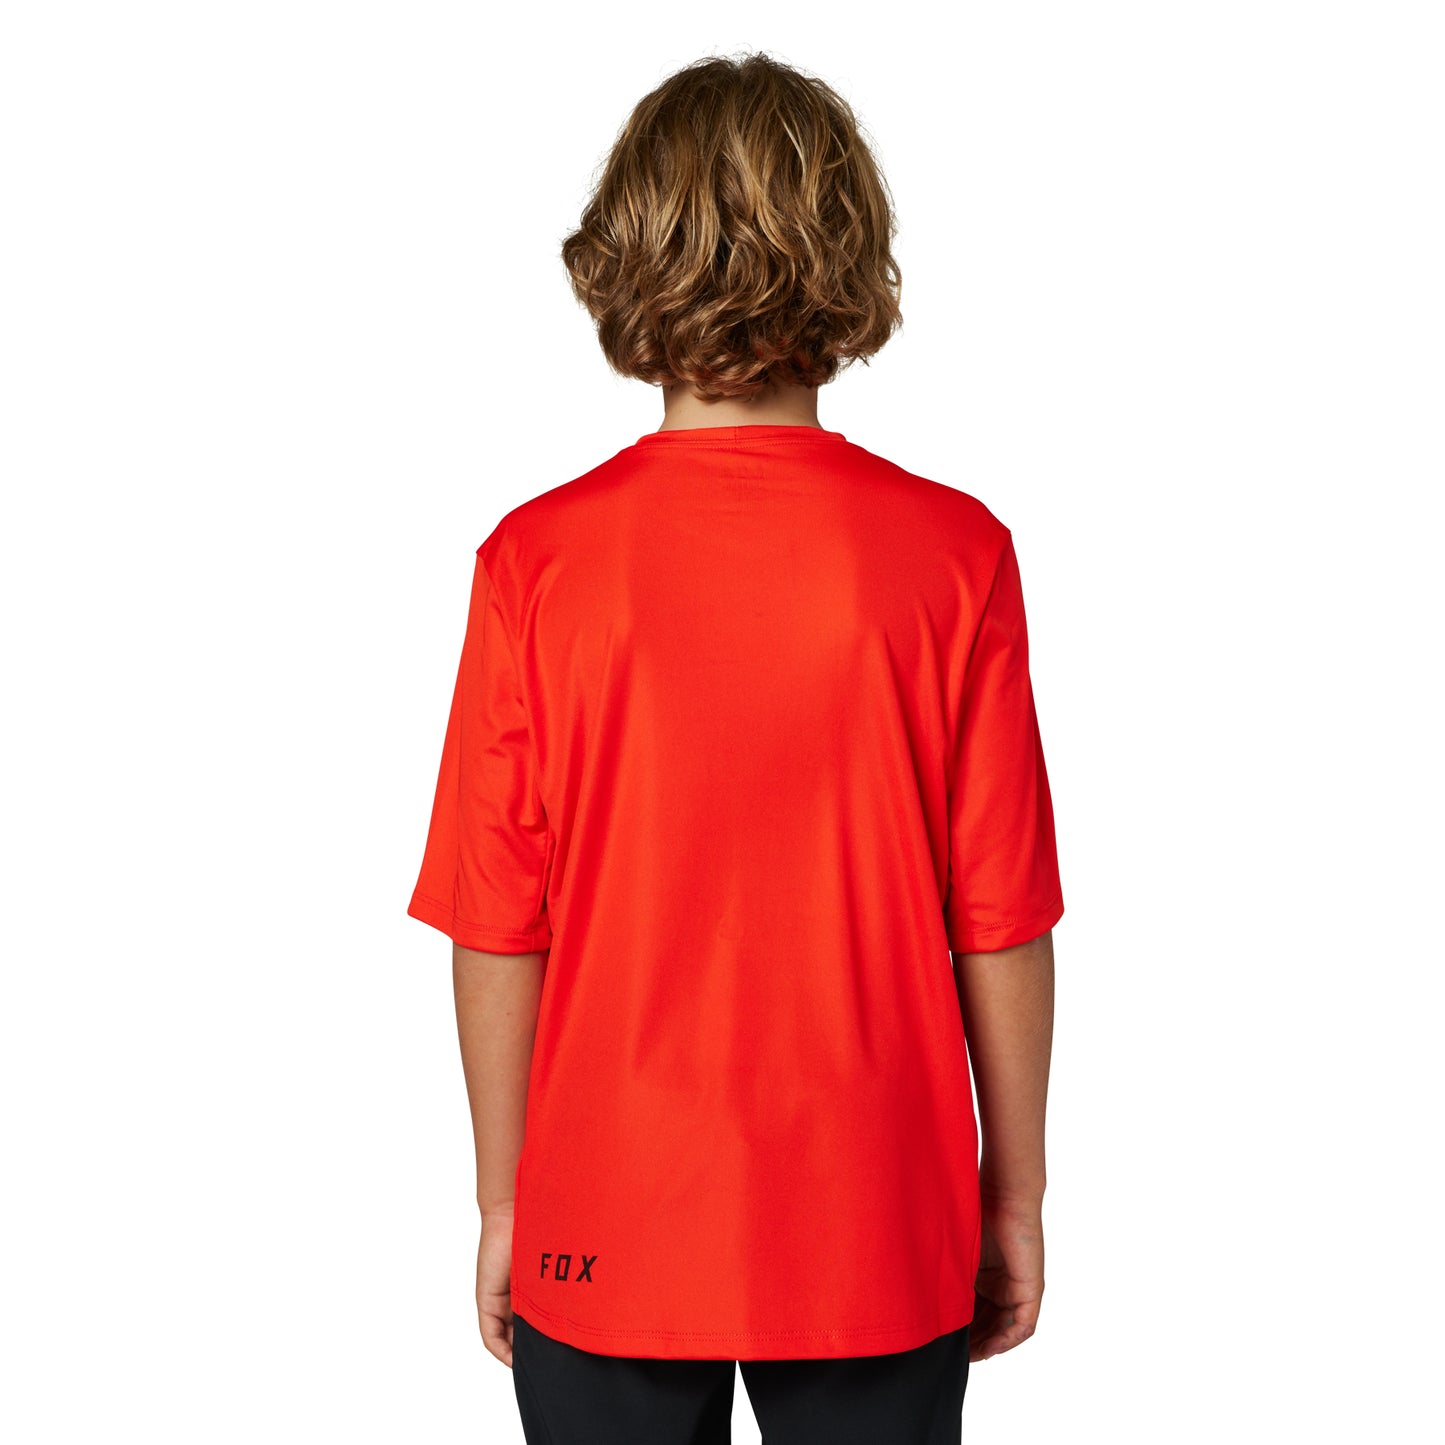 Fox Ranger Youth Short Sleeve Jersey - Youth XL - Flo Red